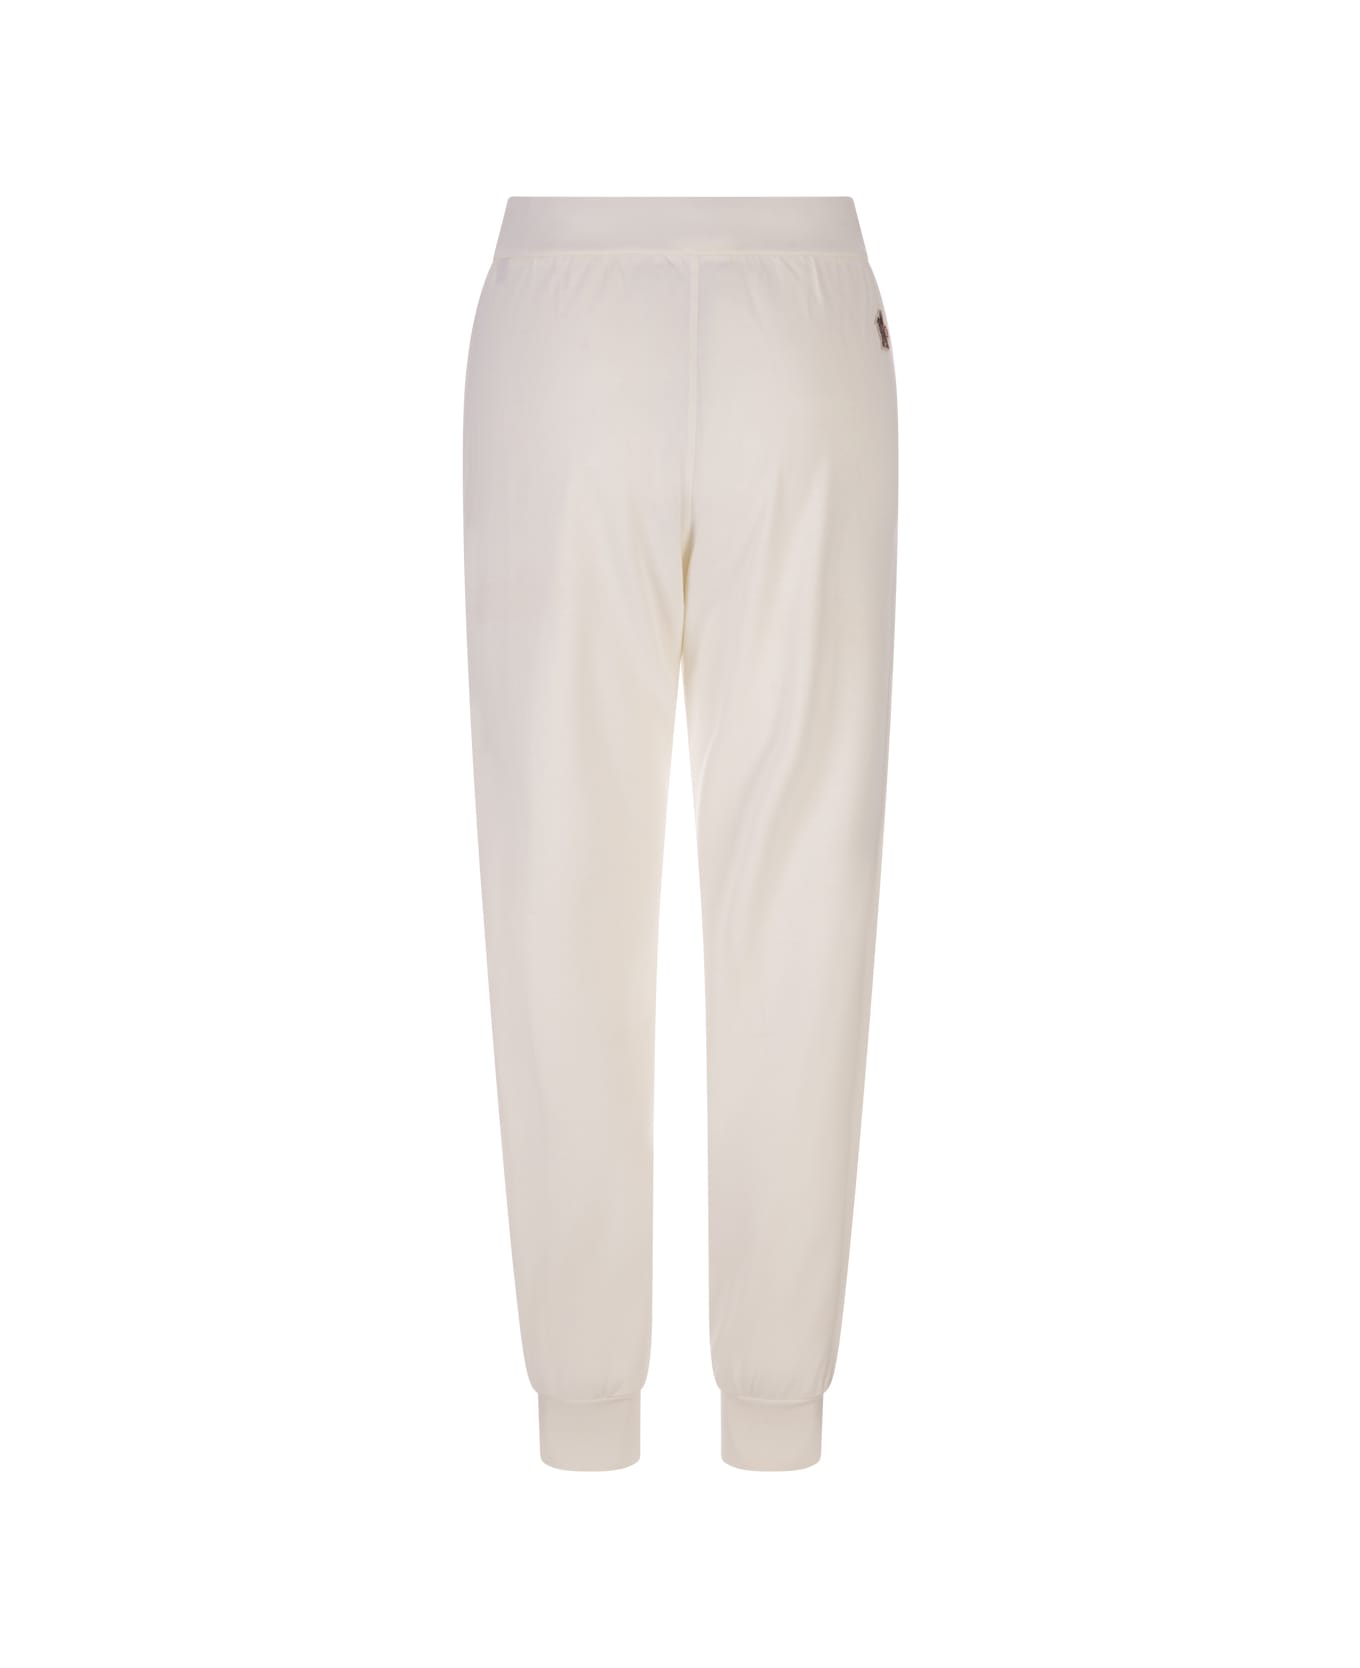 Moncler Grenoble White Joggers With Contrast Drawstring - Bianco スウェットパンツ